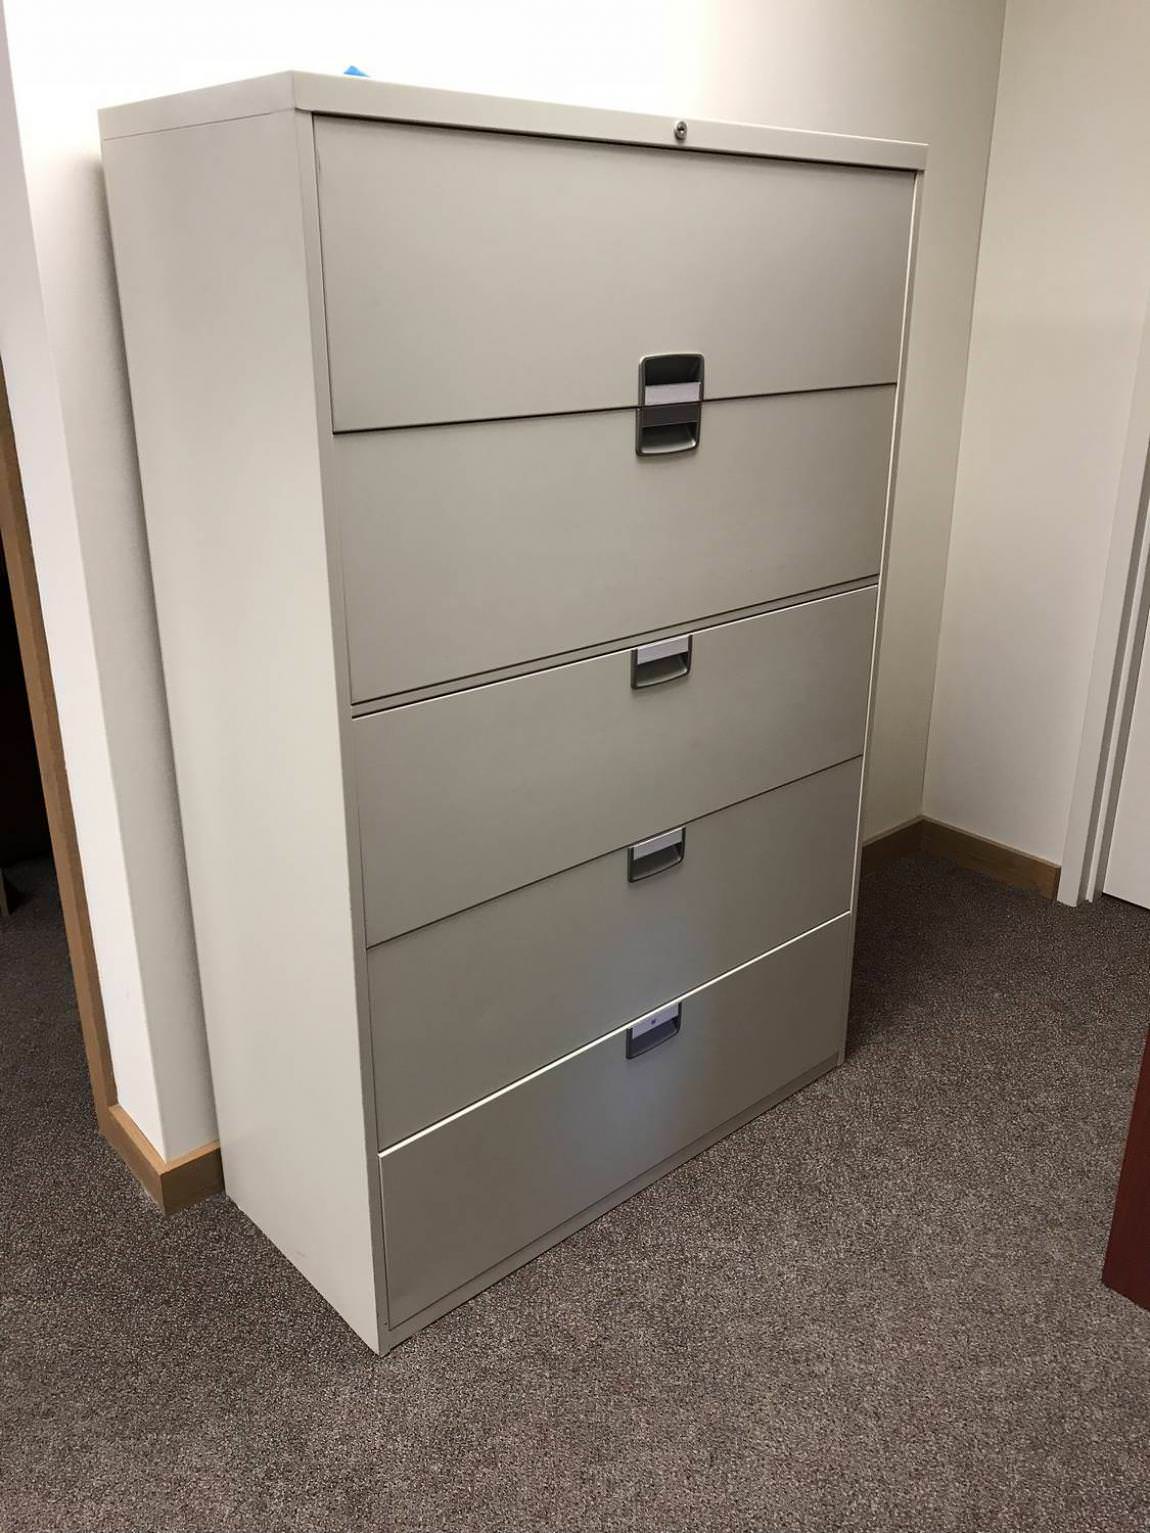 Steeelcase Putty 5 Drawer Lateral Filing Cabinet – 42 Inch Wide